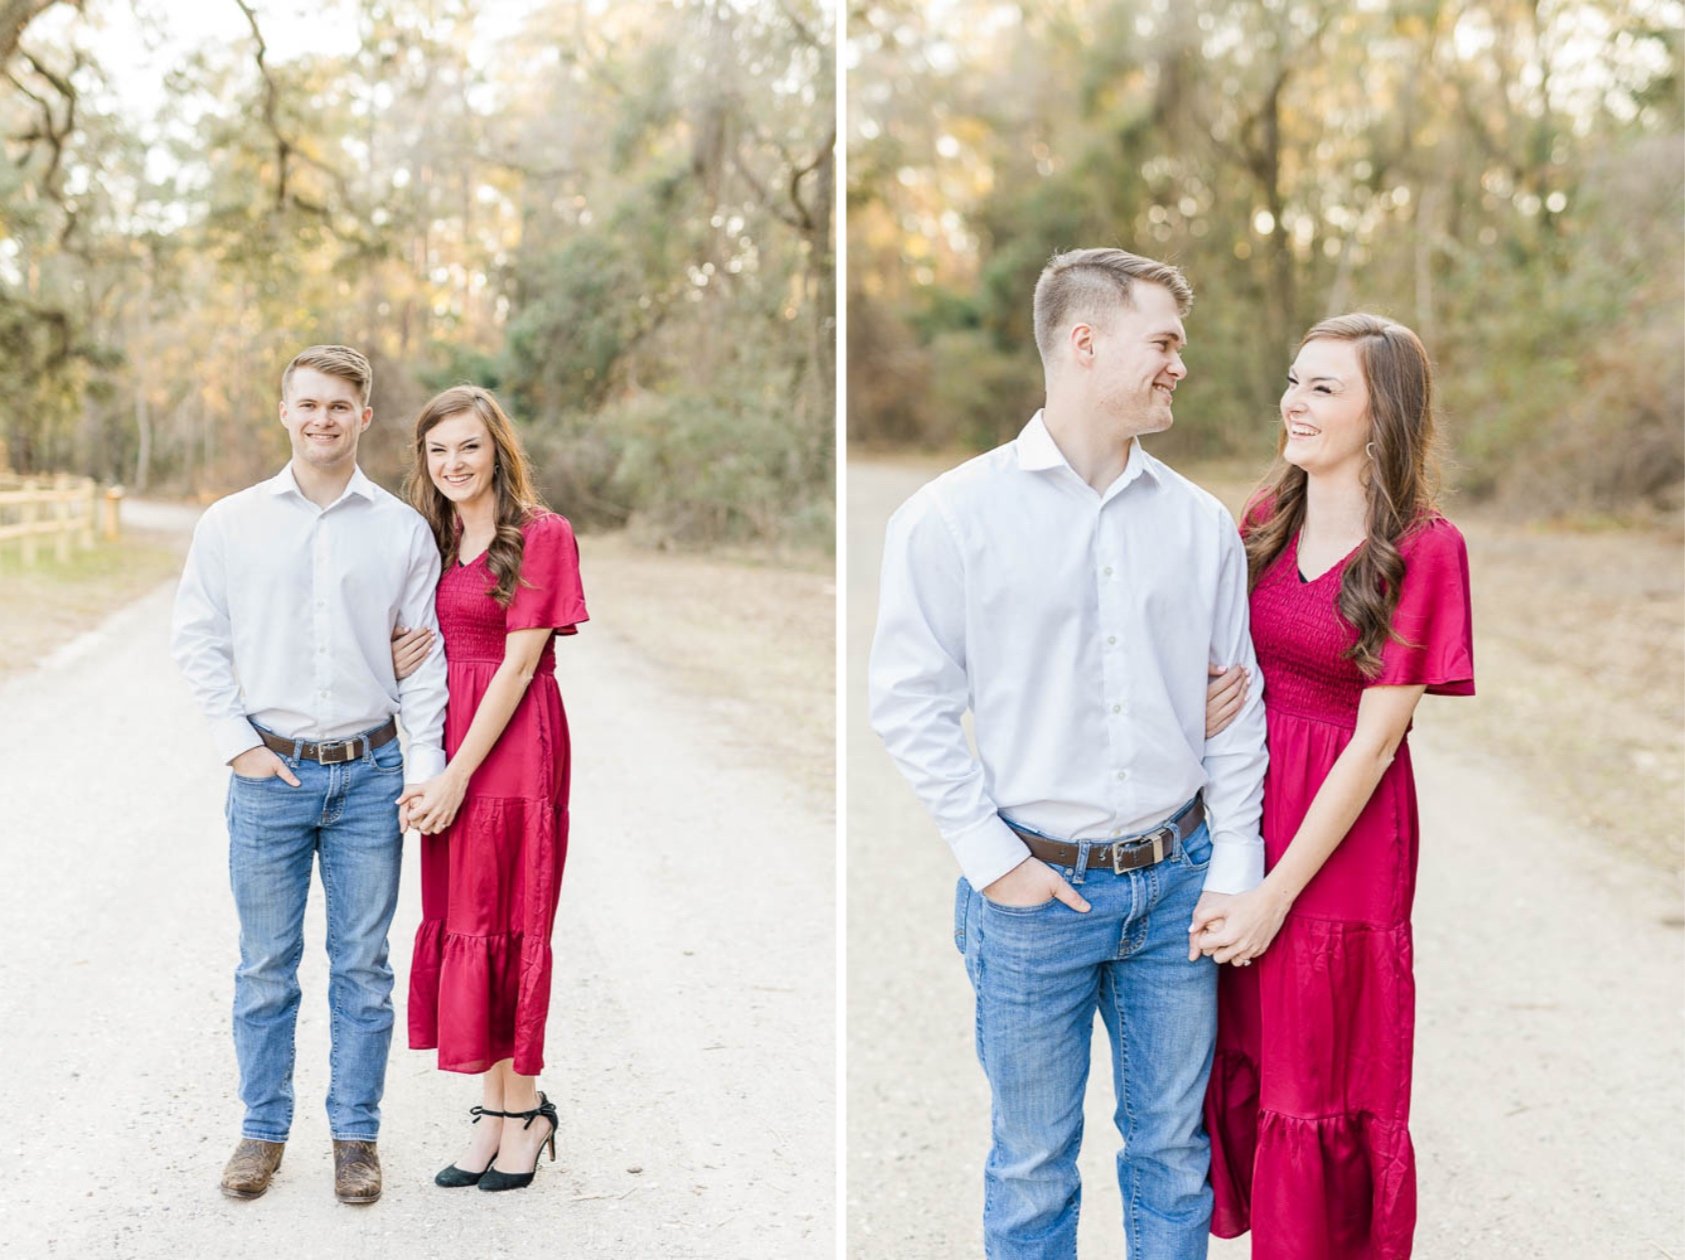 Blakely State Park Spanish Fort Alabama Engagement Session Photographed by Kristen Marcus Photography in February